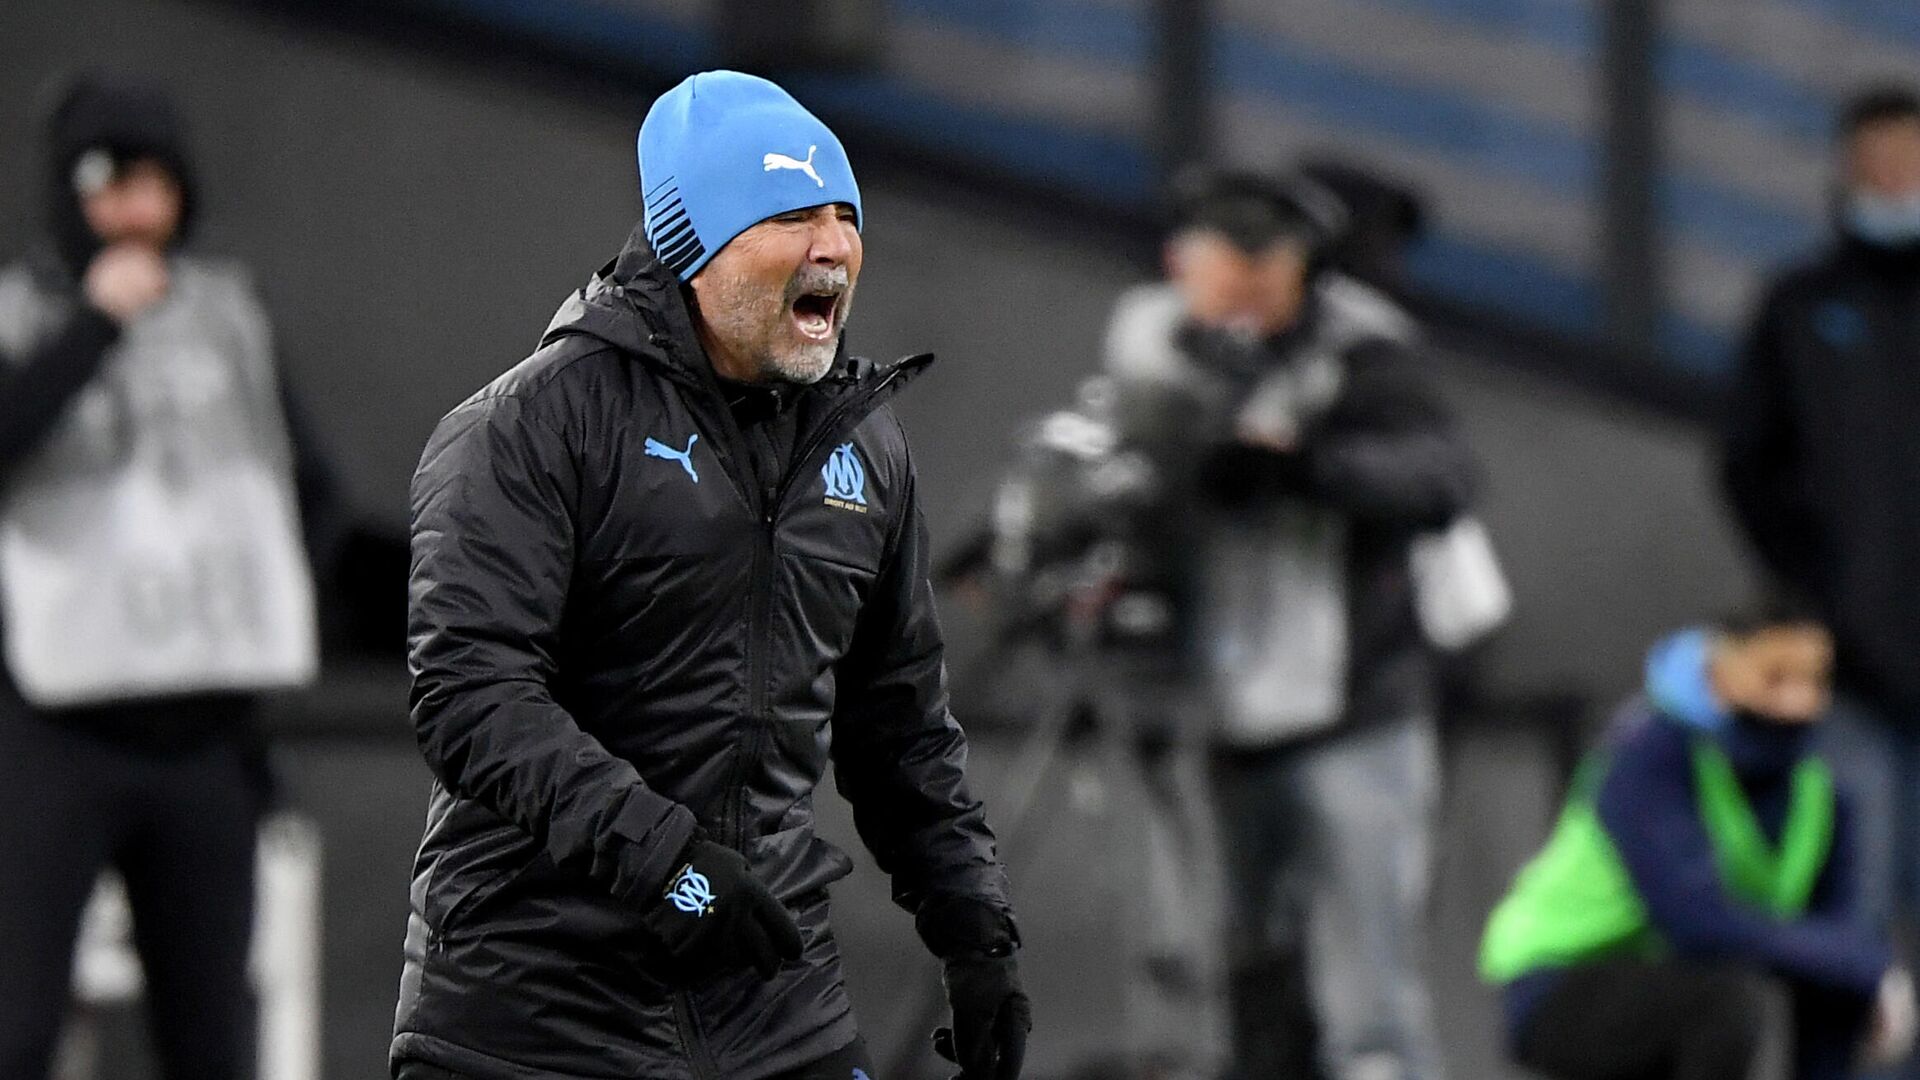 Marseille's Argentine head coach Jorge Sampaoli reacts during the French L1 football match between Olympique de Marseille and ESTAC Troyes at the Velodrome Stadium in Marseille, southern France on November 28, 2021. (Photo by Nicolas TUCAT / AFP) - РИА Новости, 1920, 08.12.2021